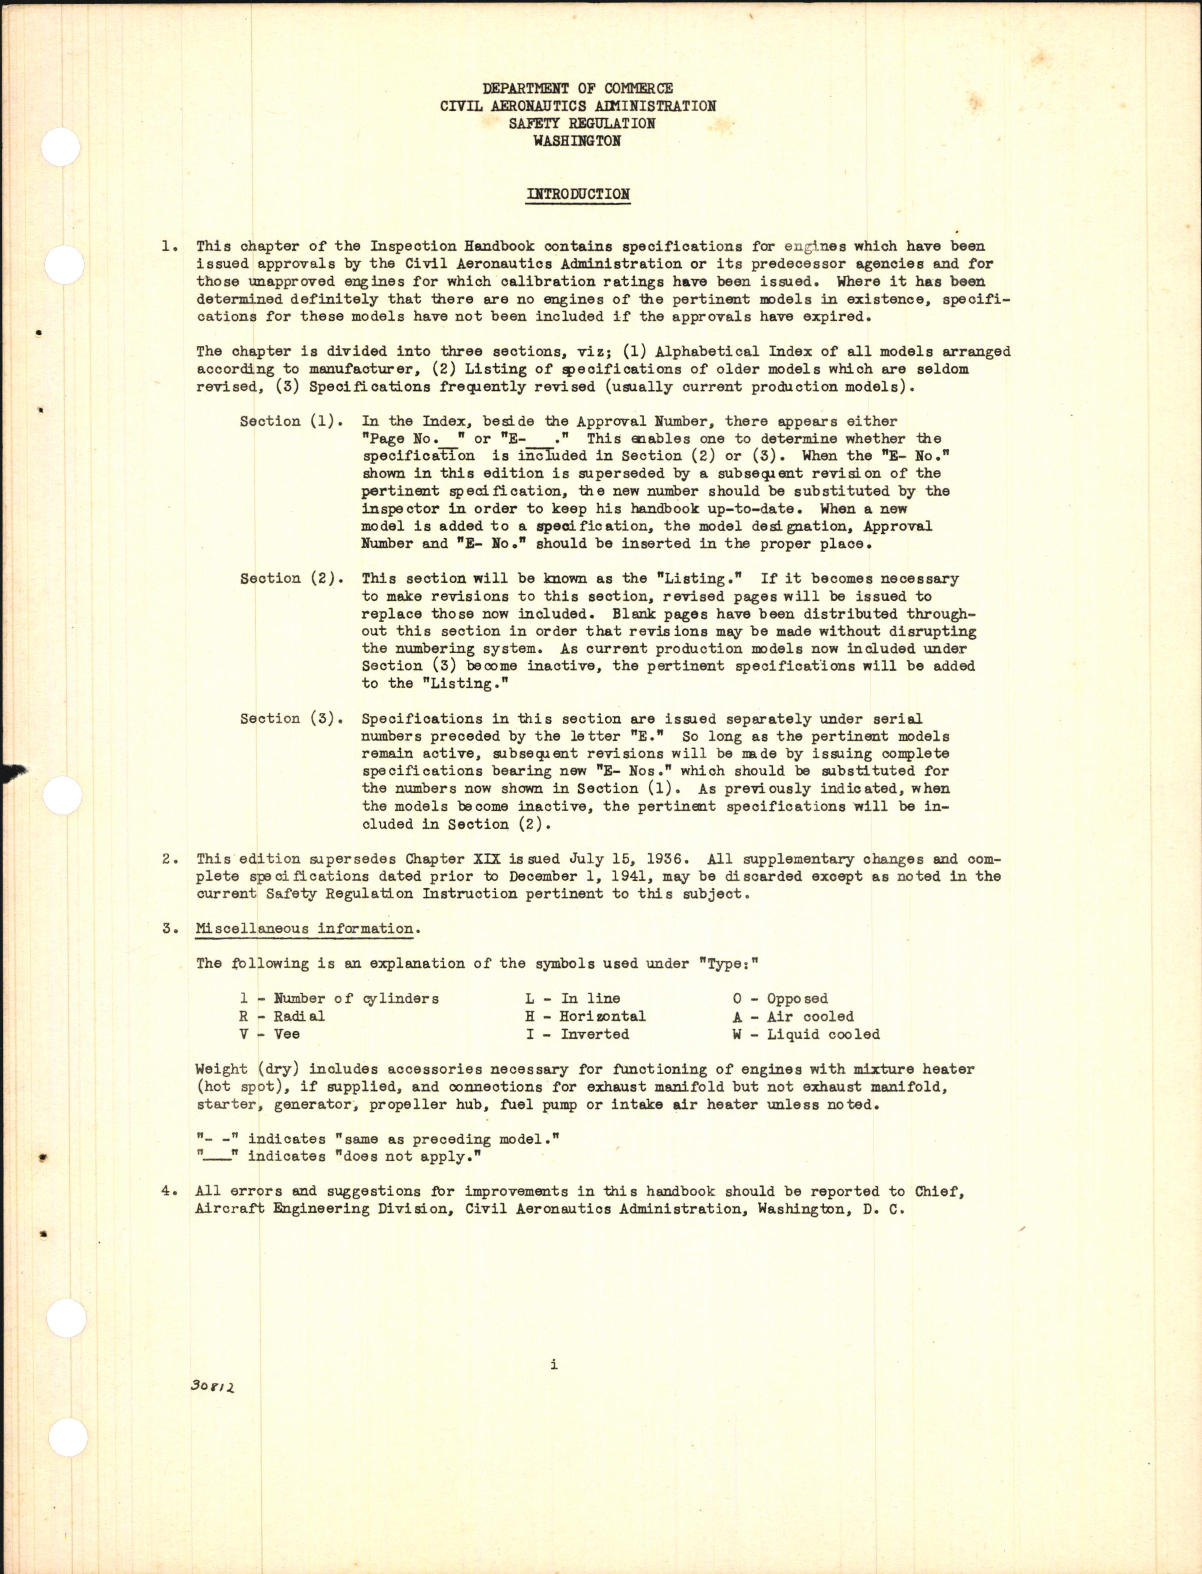 Sample page 10 from AirCorps Library document: Inspection Handbook for Aircraft Engines